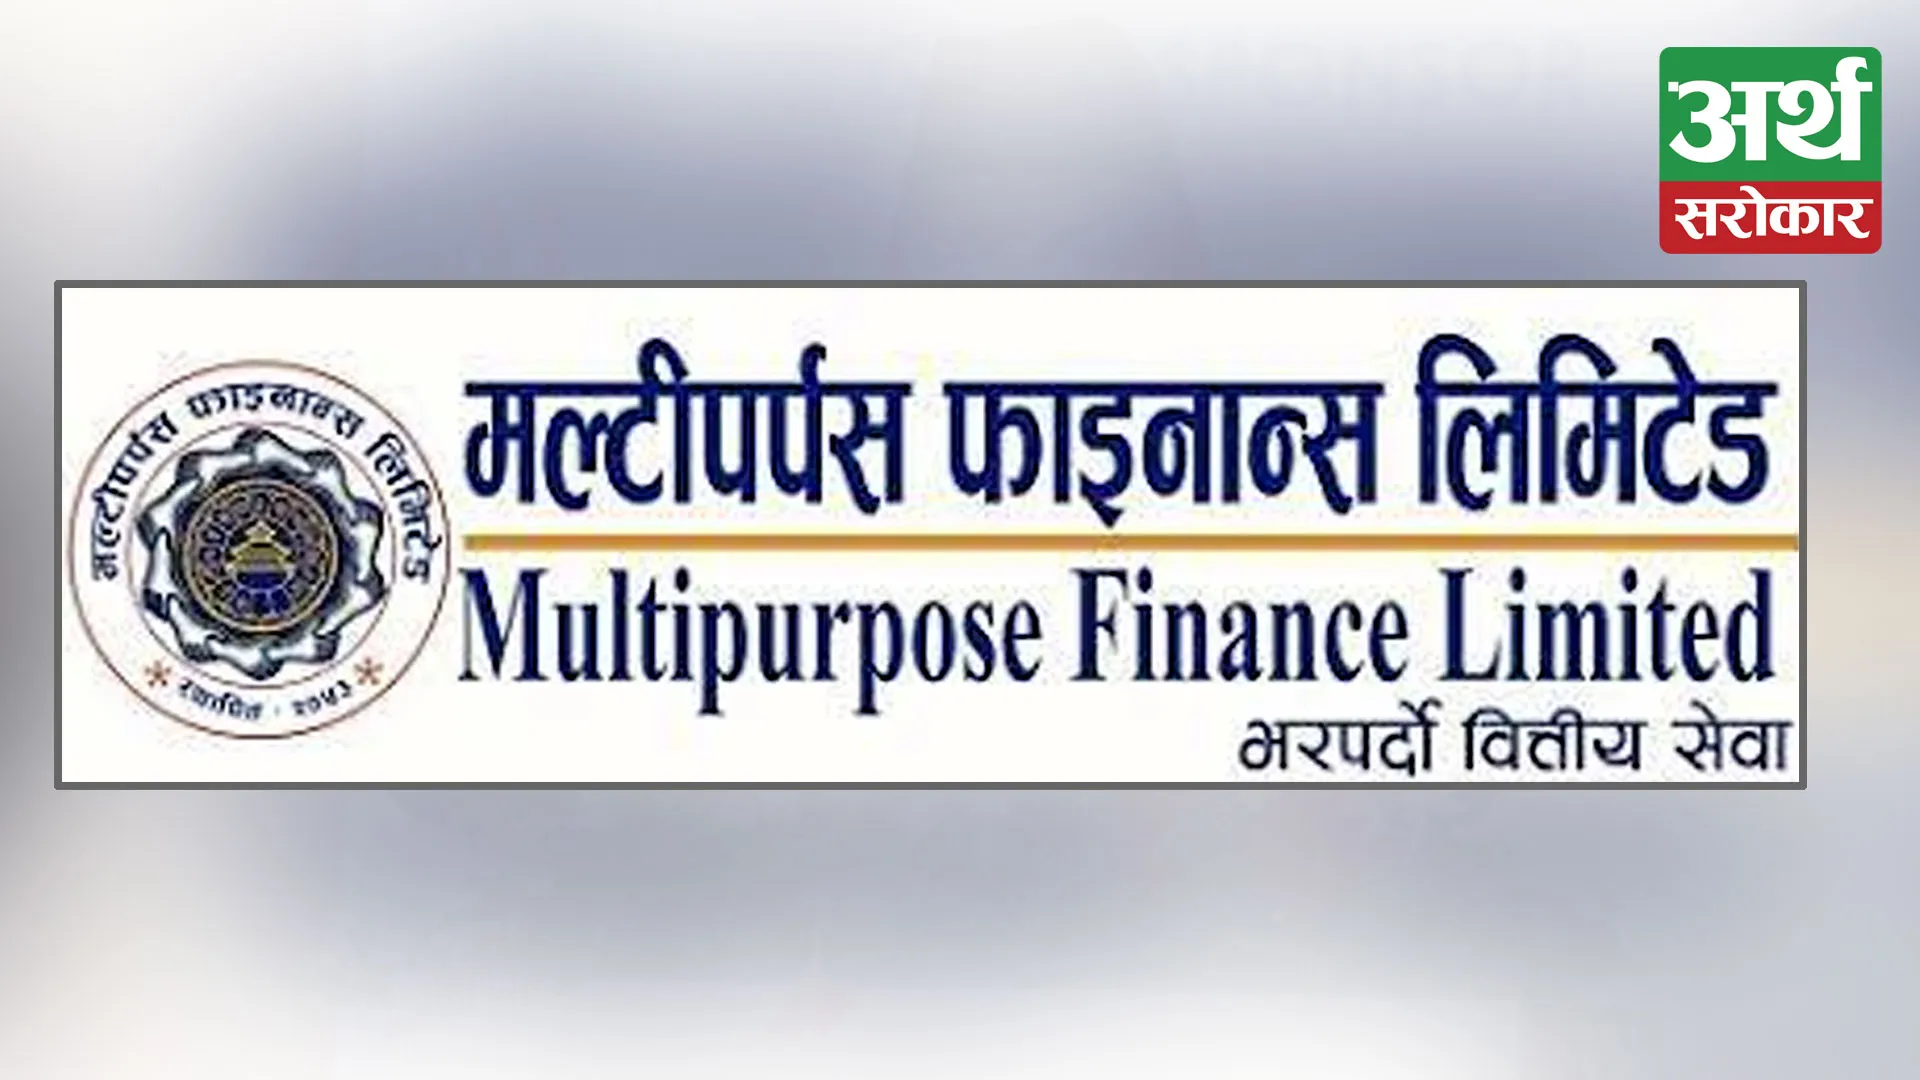 Multipurpose Finance brought founder shares for sale